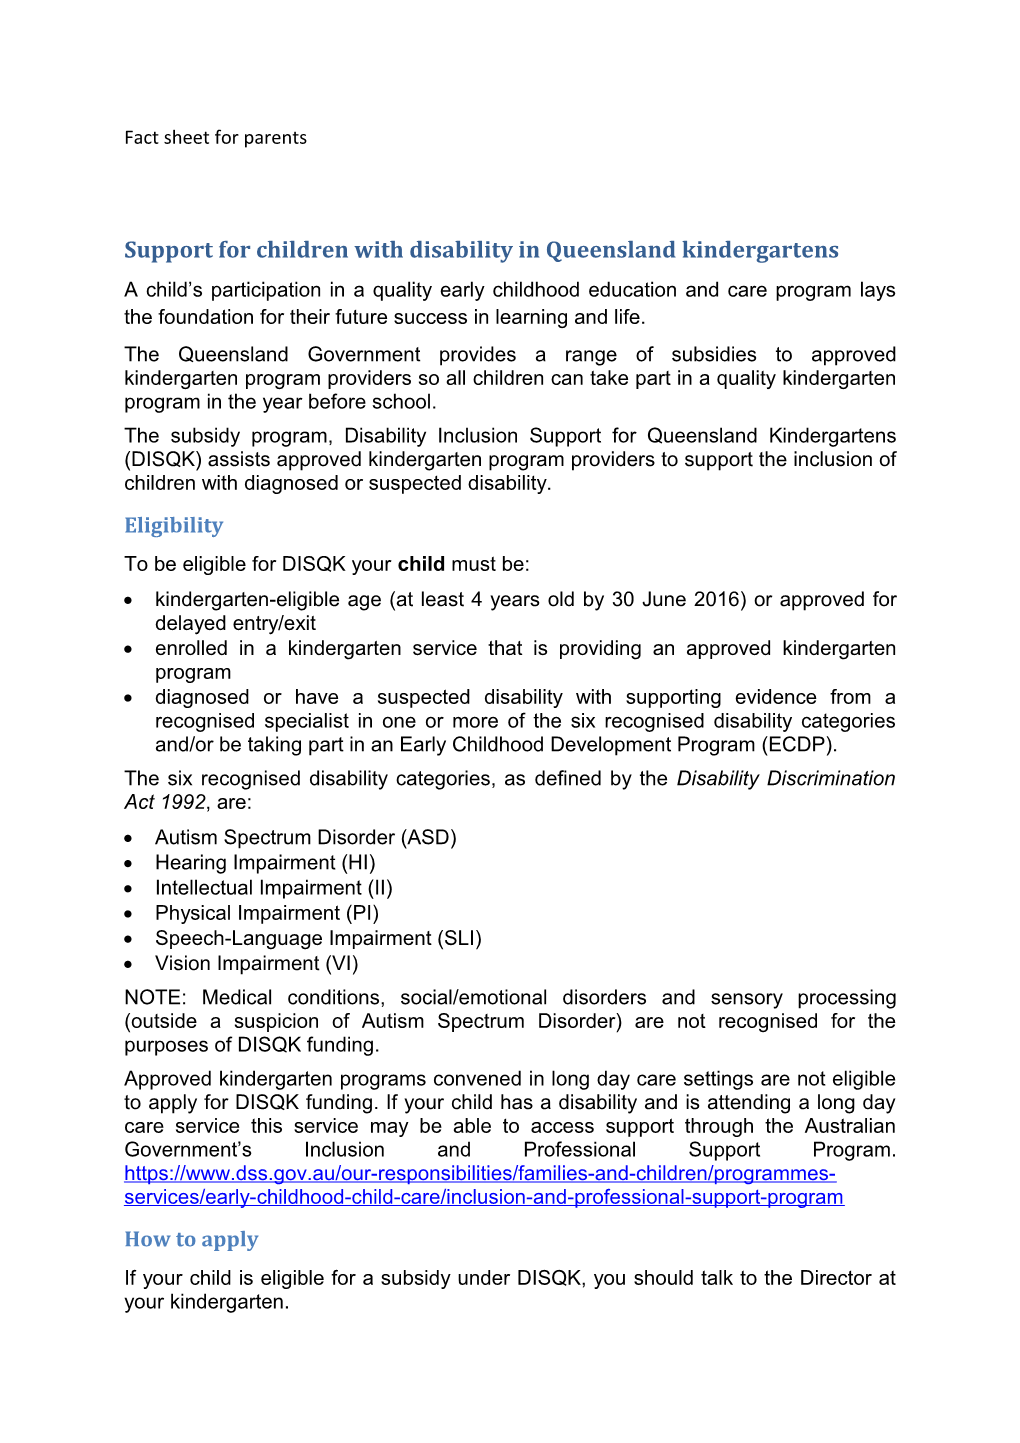 Support for Children with Disability in Queensland Kindergartens